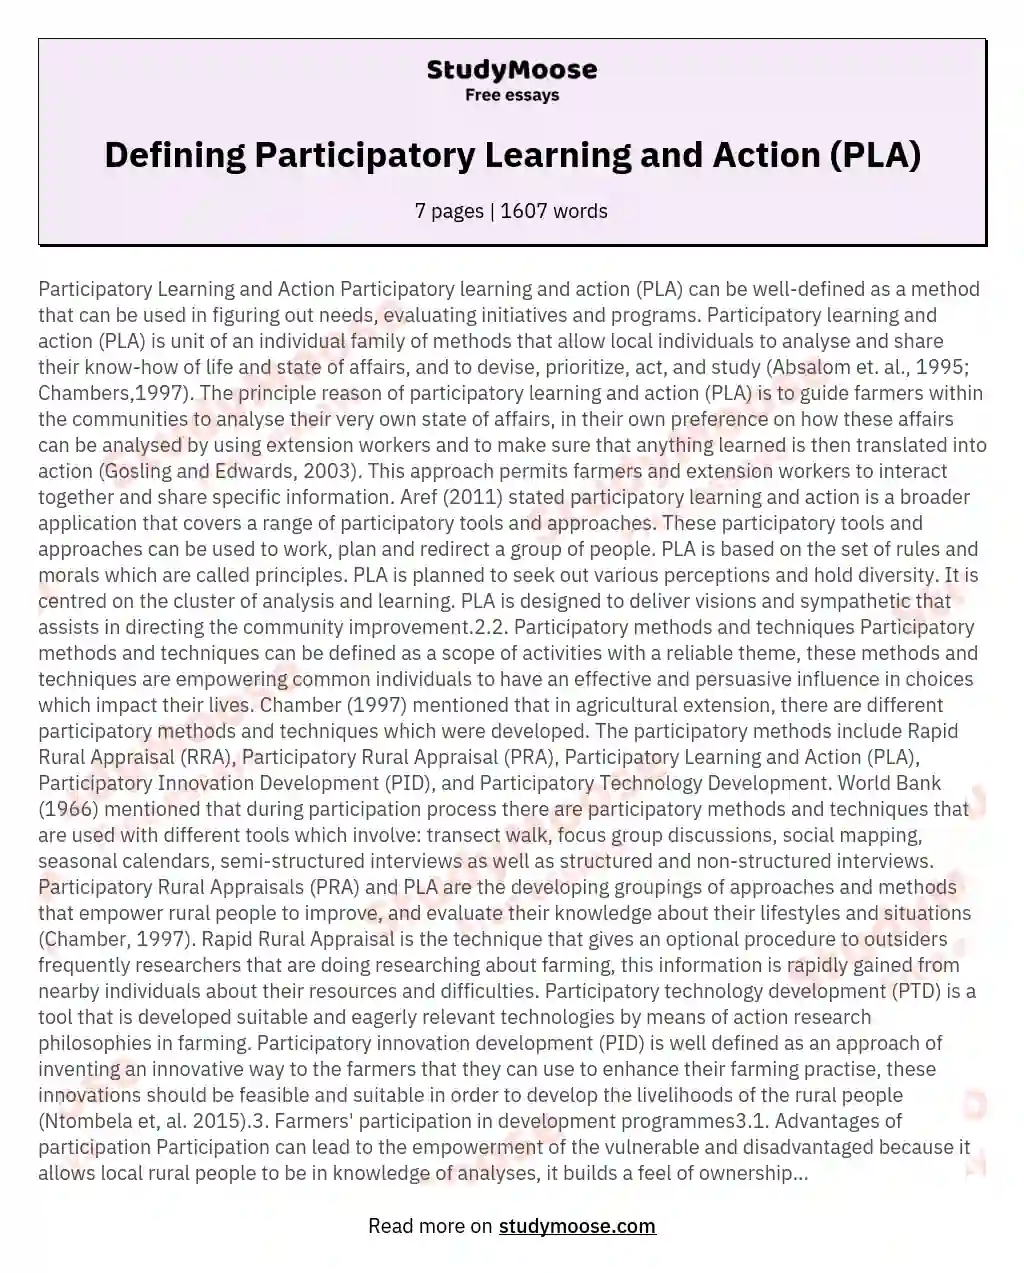 Participatory Learning and Action Participatory learning and action PLA can be welldefined as